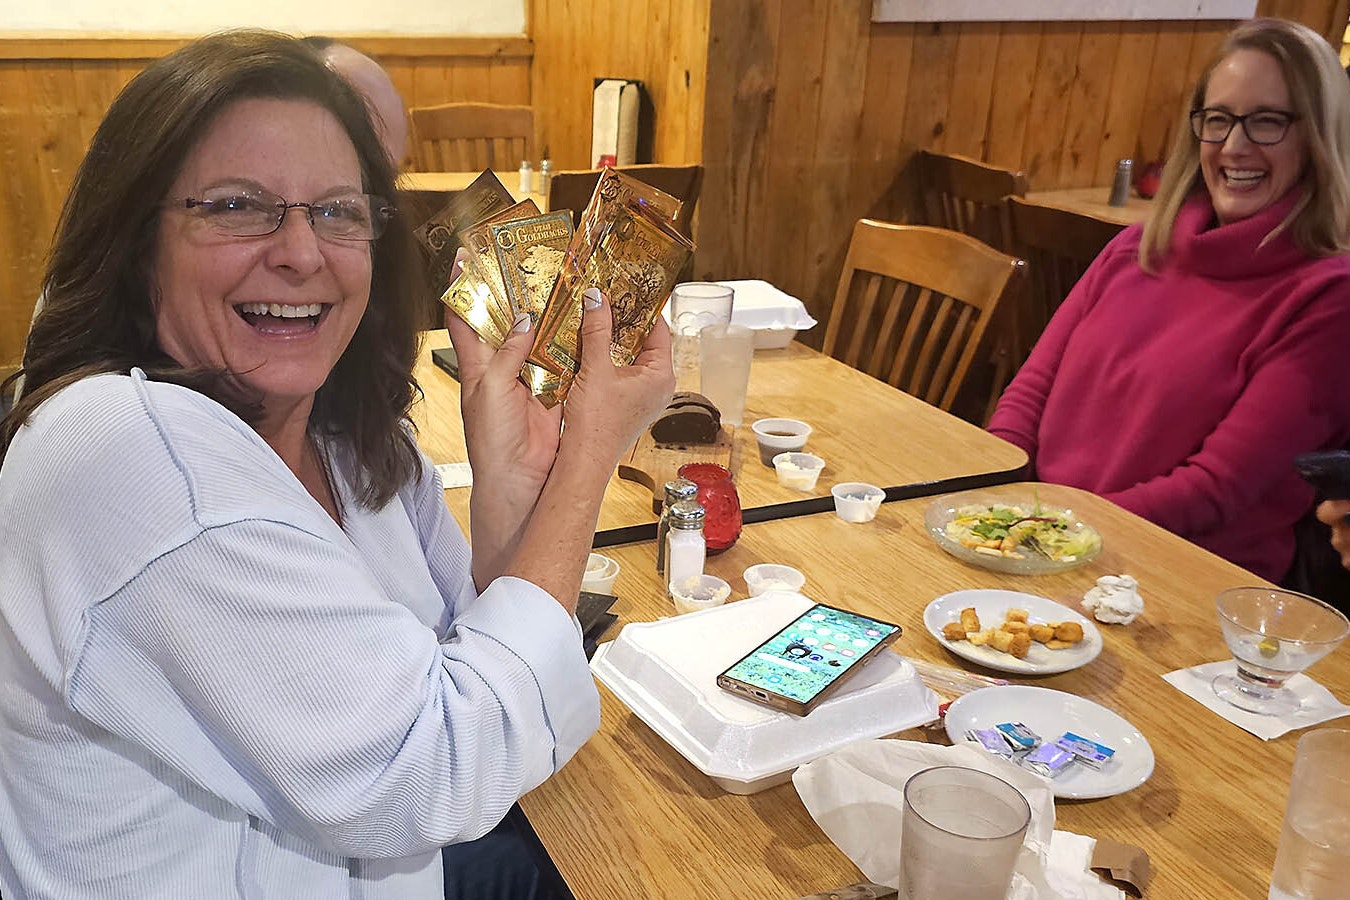 Laura Hoch holds up goldback bills she and her husband Chris intend to use to pay for their dinner at T-Joe's Steakhouse and Saloon in Cheyenne. The couple drove up all the way from Fort Collins for dinner at a place where they can spend their goldbacks.